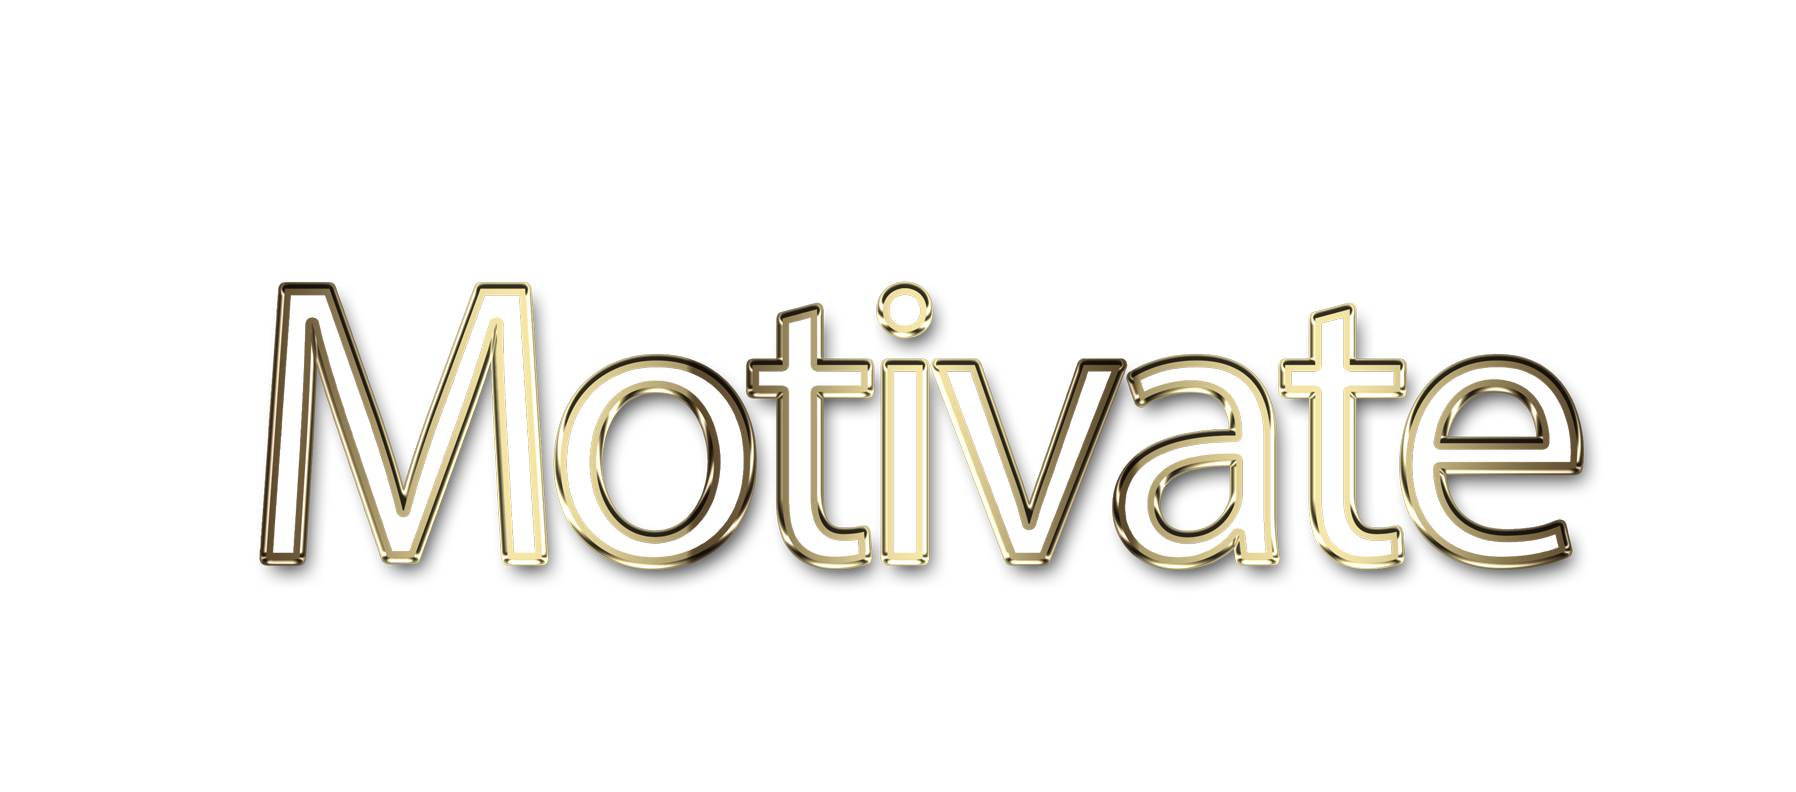 Motivate png, word Motivate png, Motivate word png, Motivate text png, Motivate letters png, Motivate word art typography PNG images, transparent png